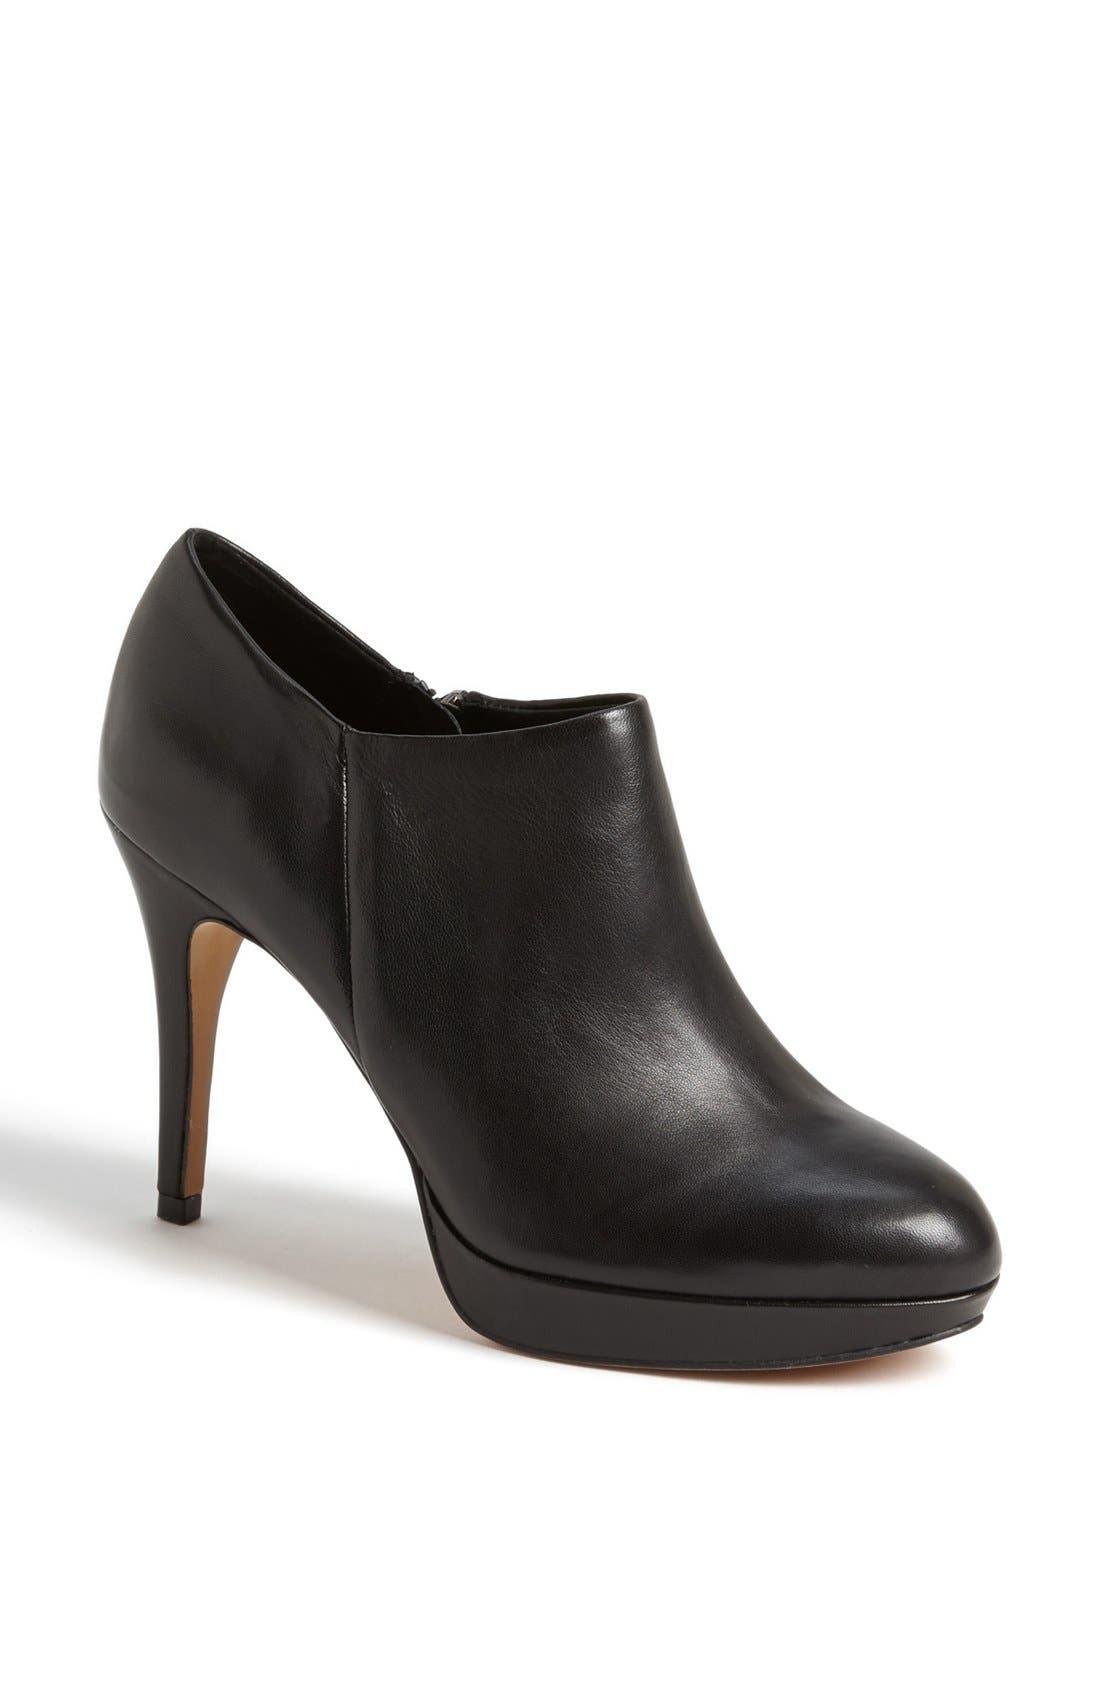 UPC 886216641349 product image for Women's Vince Camuto 'Elvin' Bootie, Size 7 M - Black | upcitemdb.com